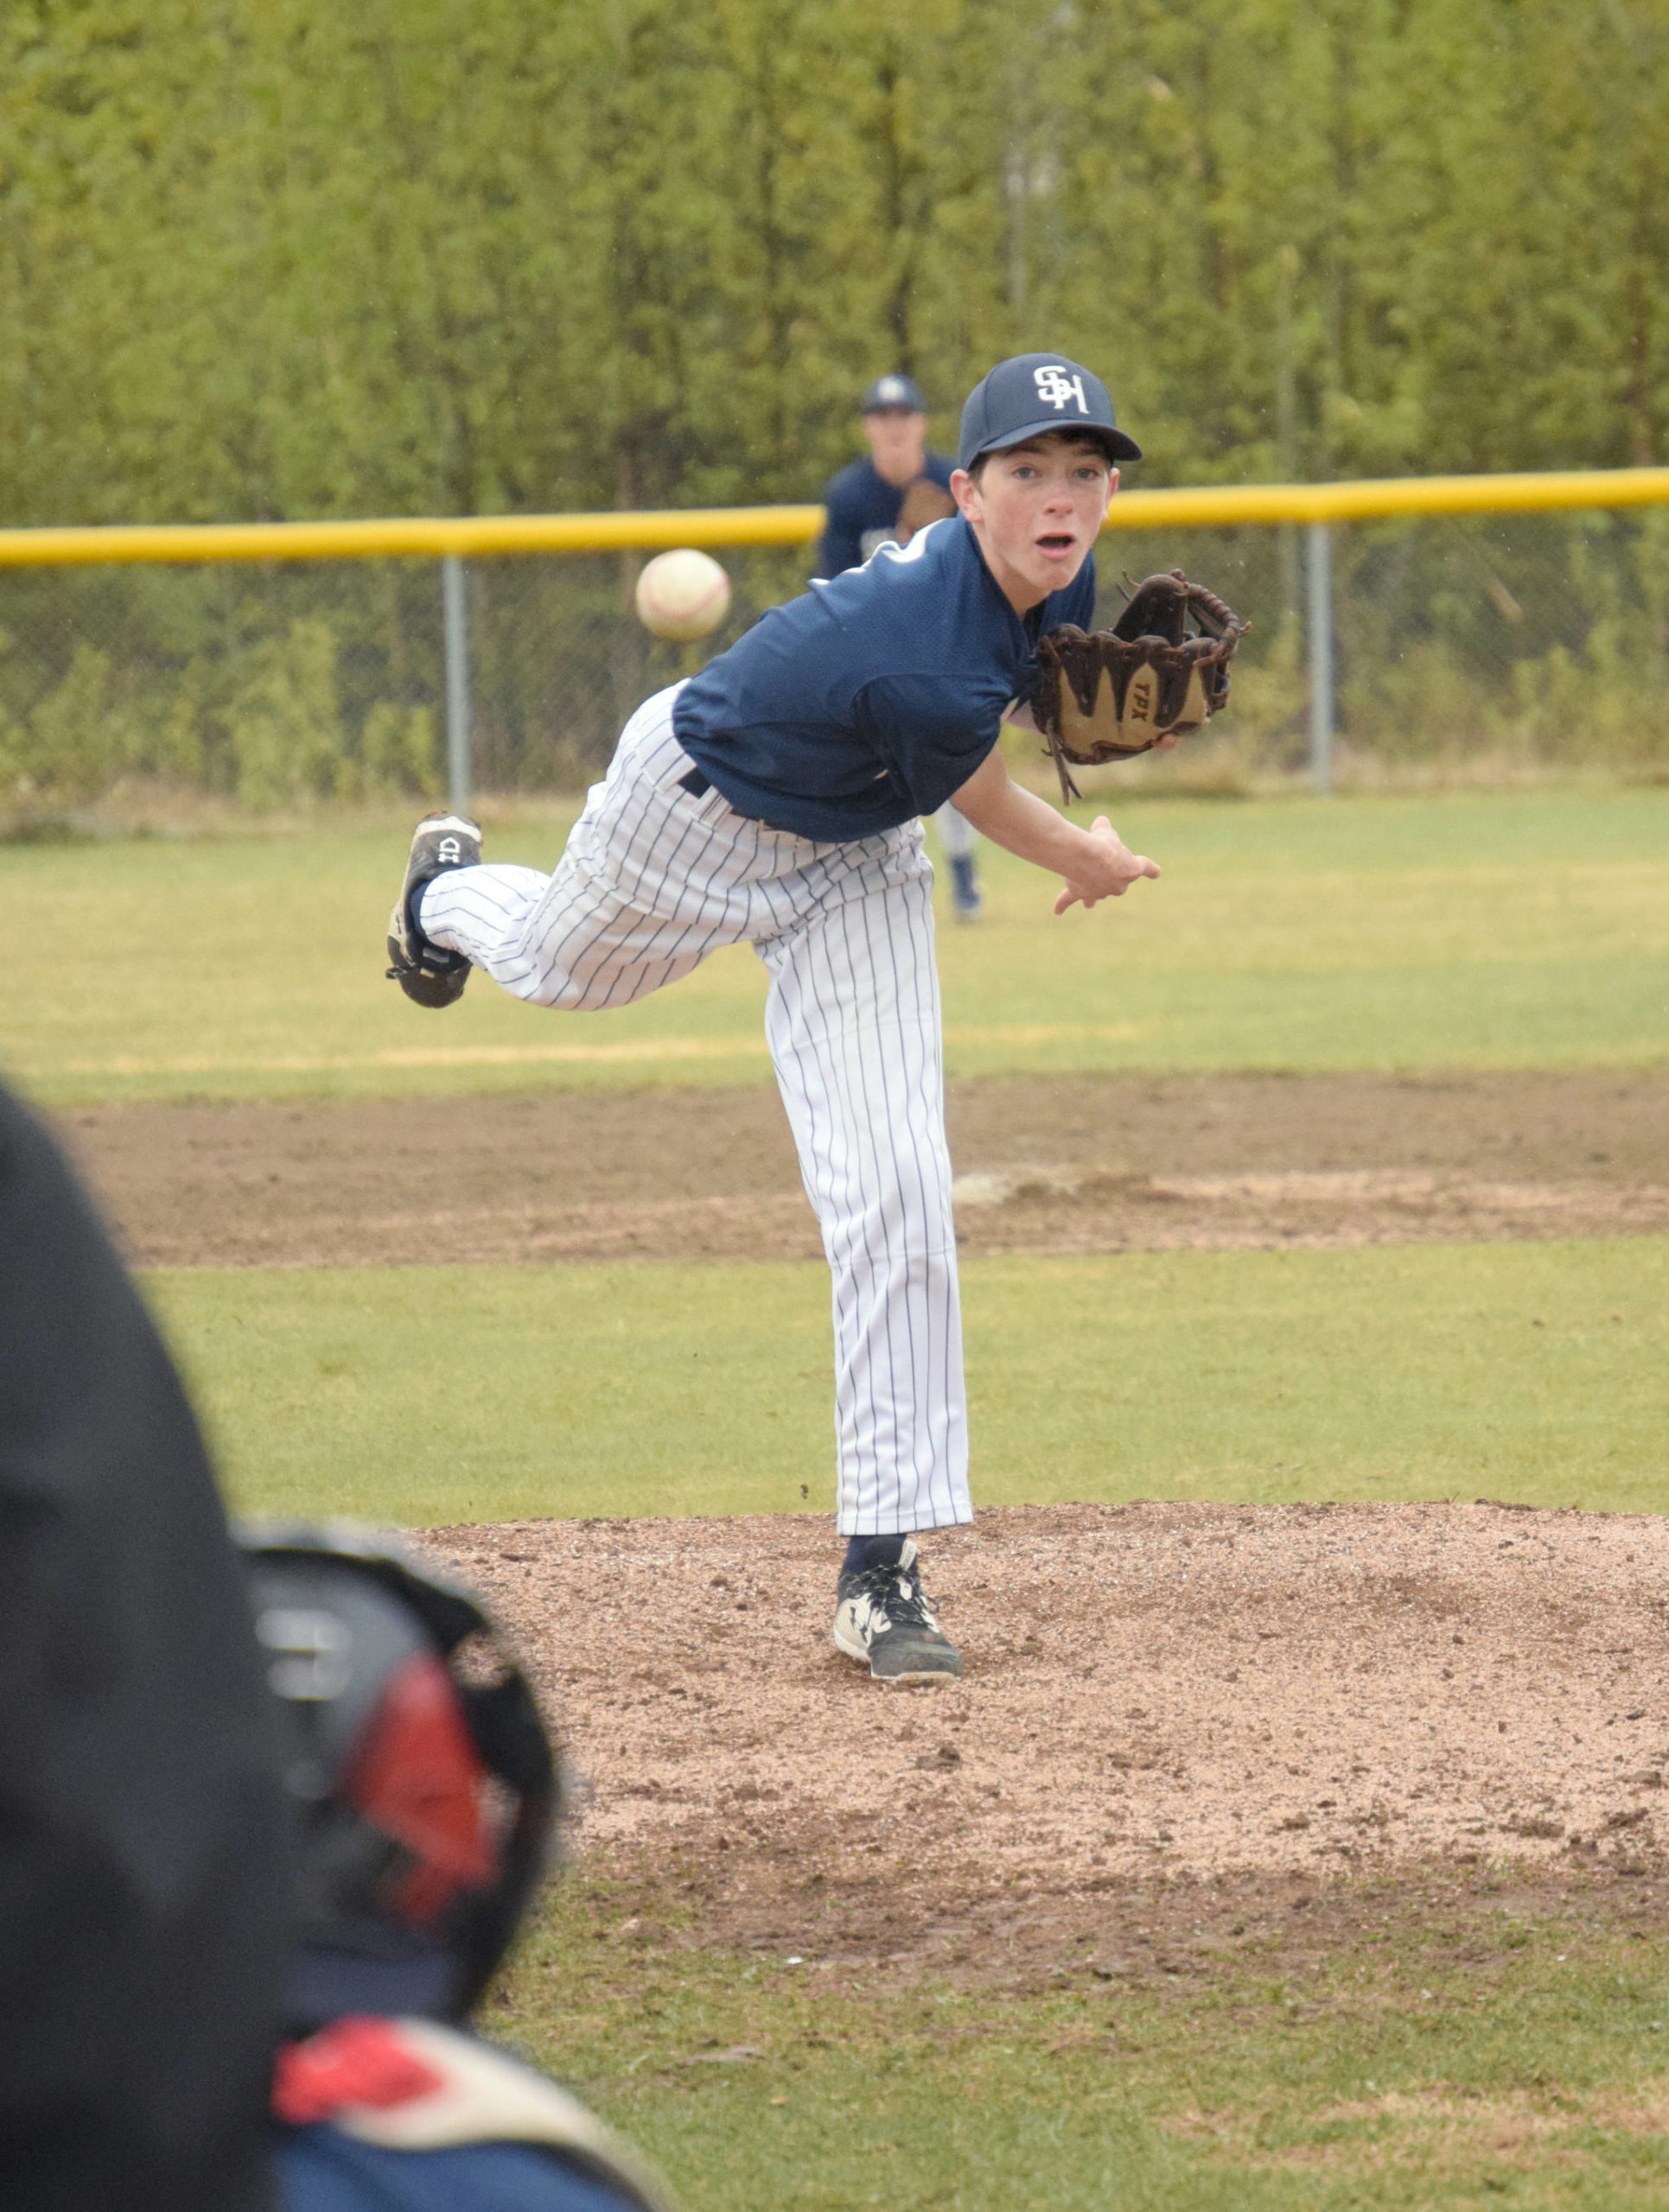 Soldotna pitcher Derrick Jones delivers to Homer on Saturday, May 29, 2021, in the Southcentral Conference tournament at the Soldotna Little League fields in Soldotna, Alaska. (Photo by Jeff Helminiak/Peninsula Clarion)